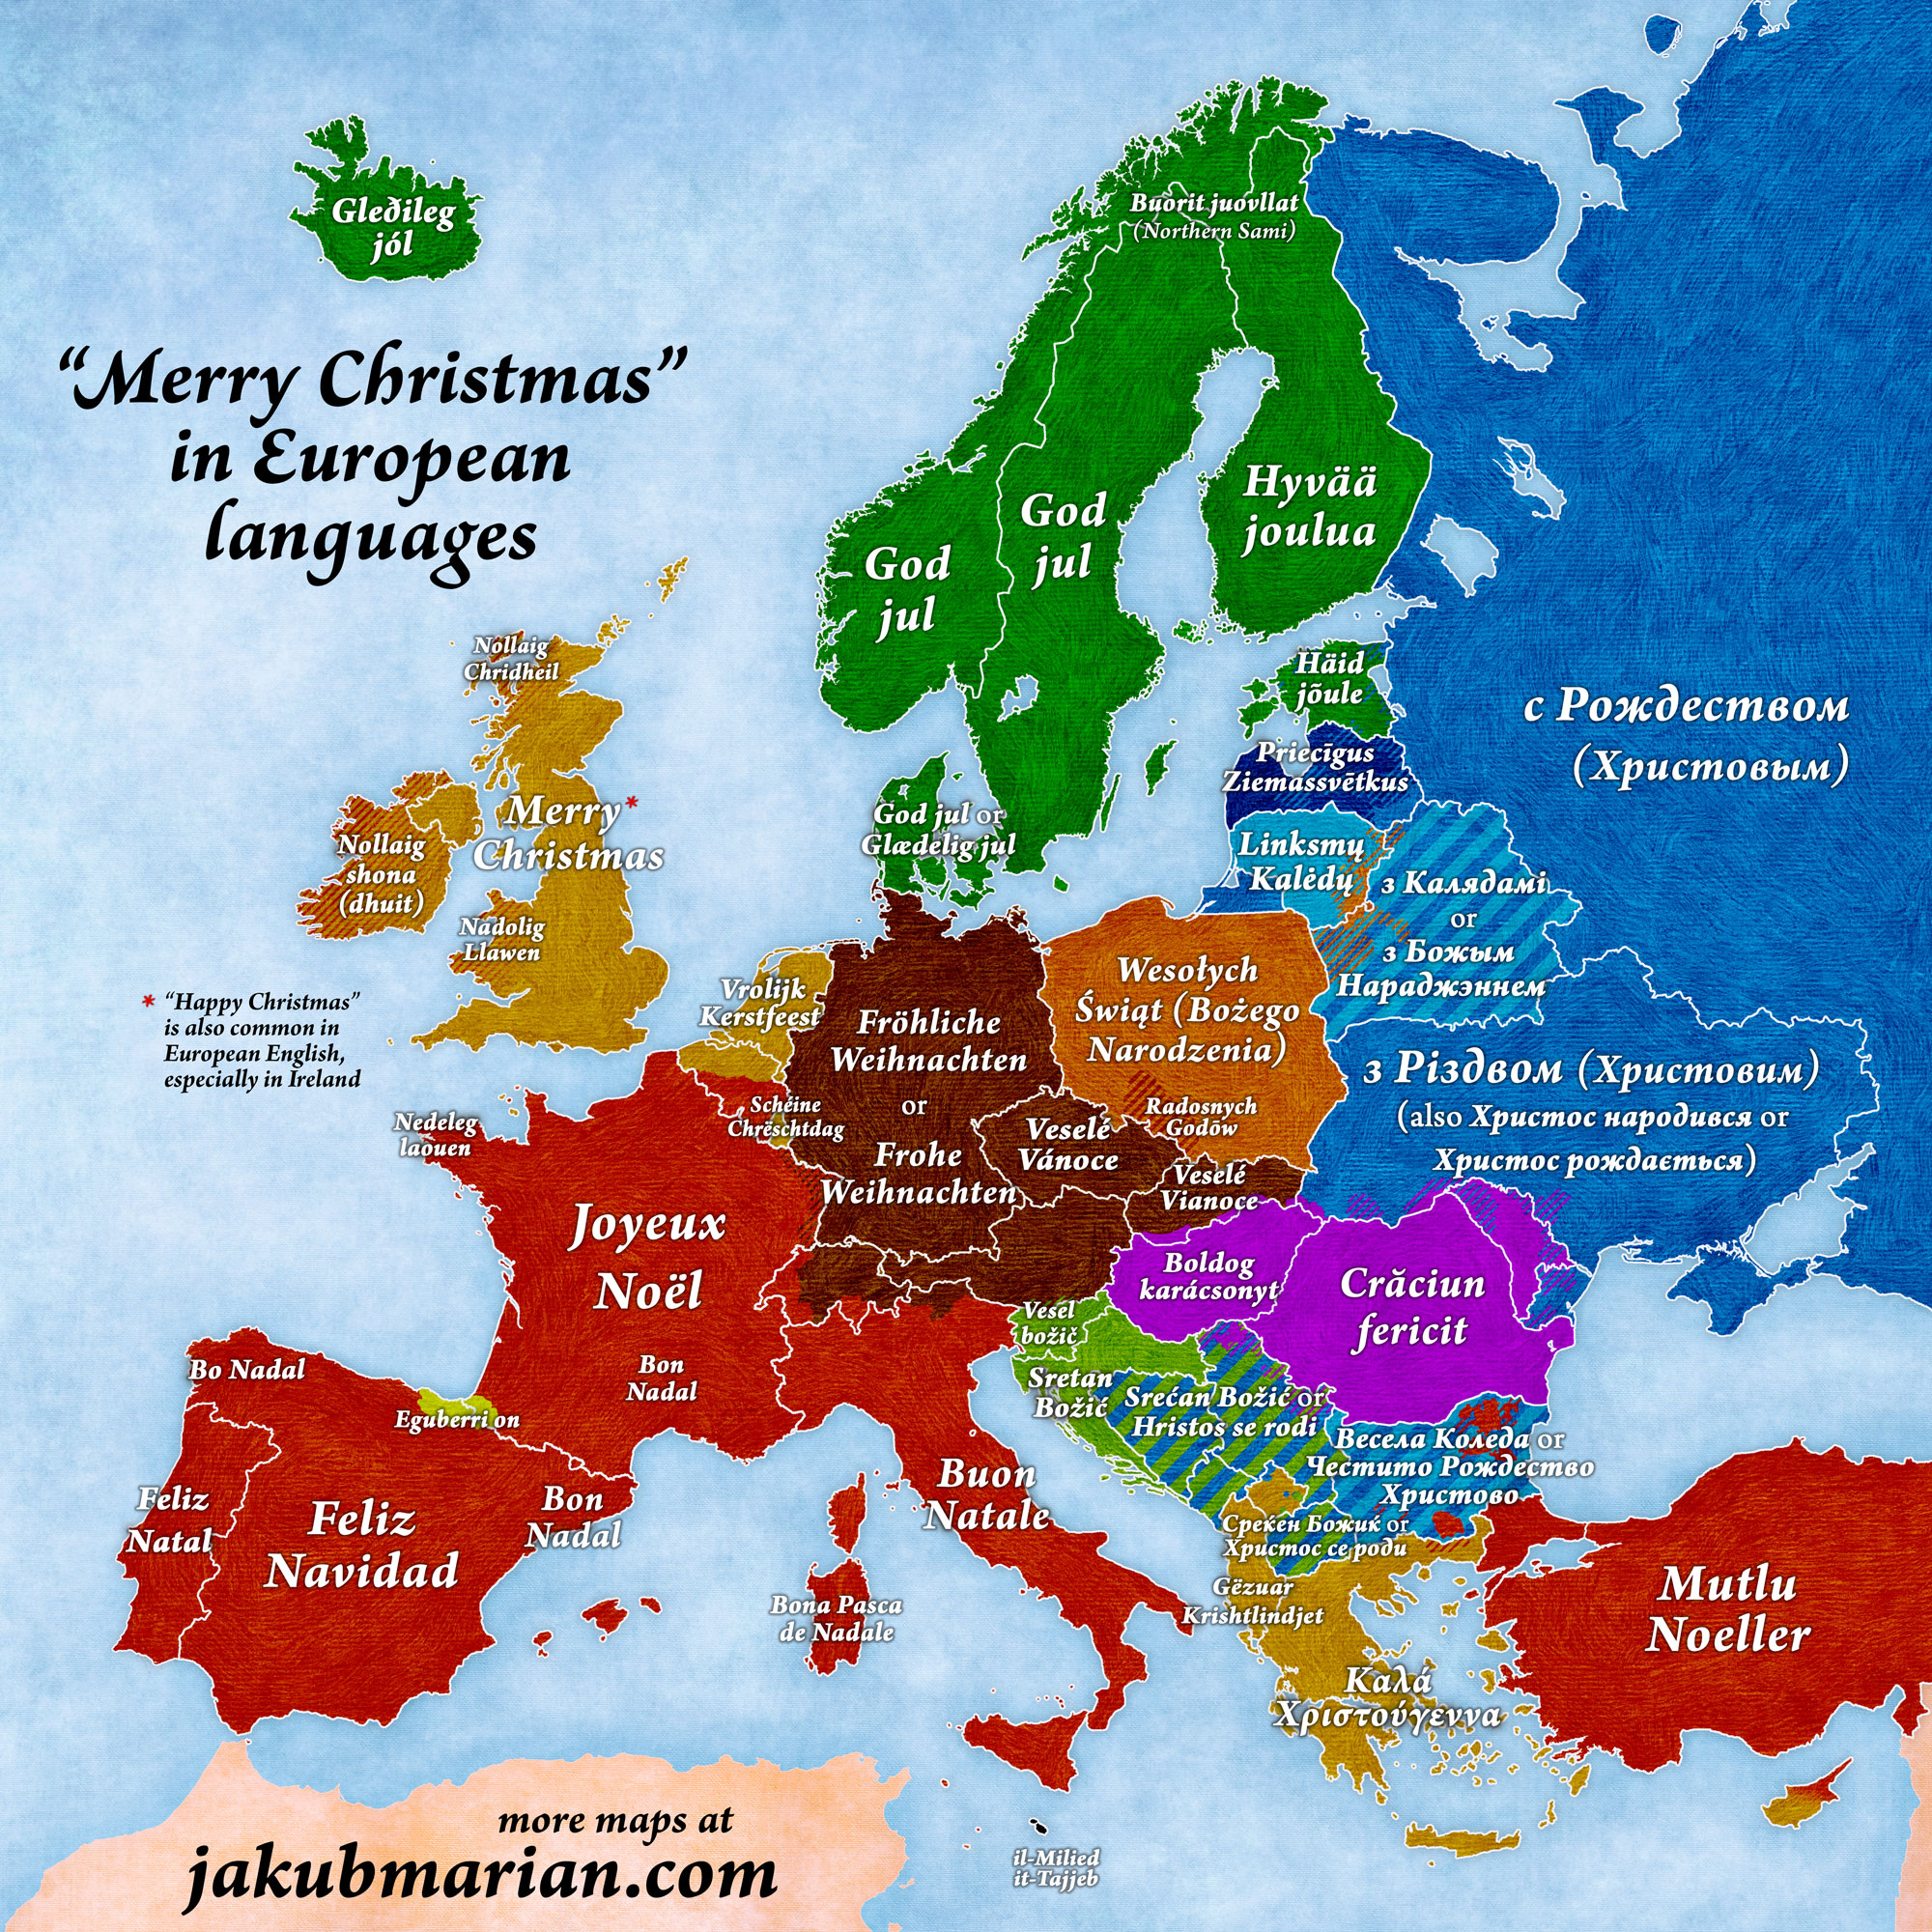 ‘Merry Christmas’ in European languages (map)